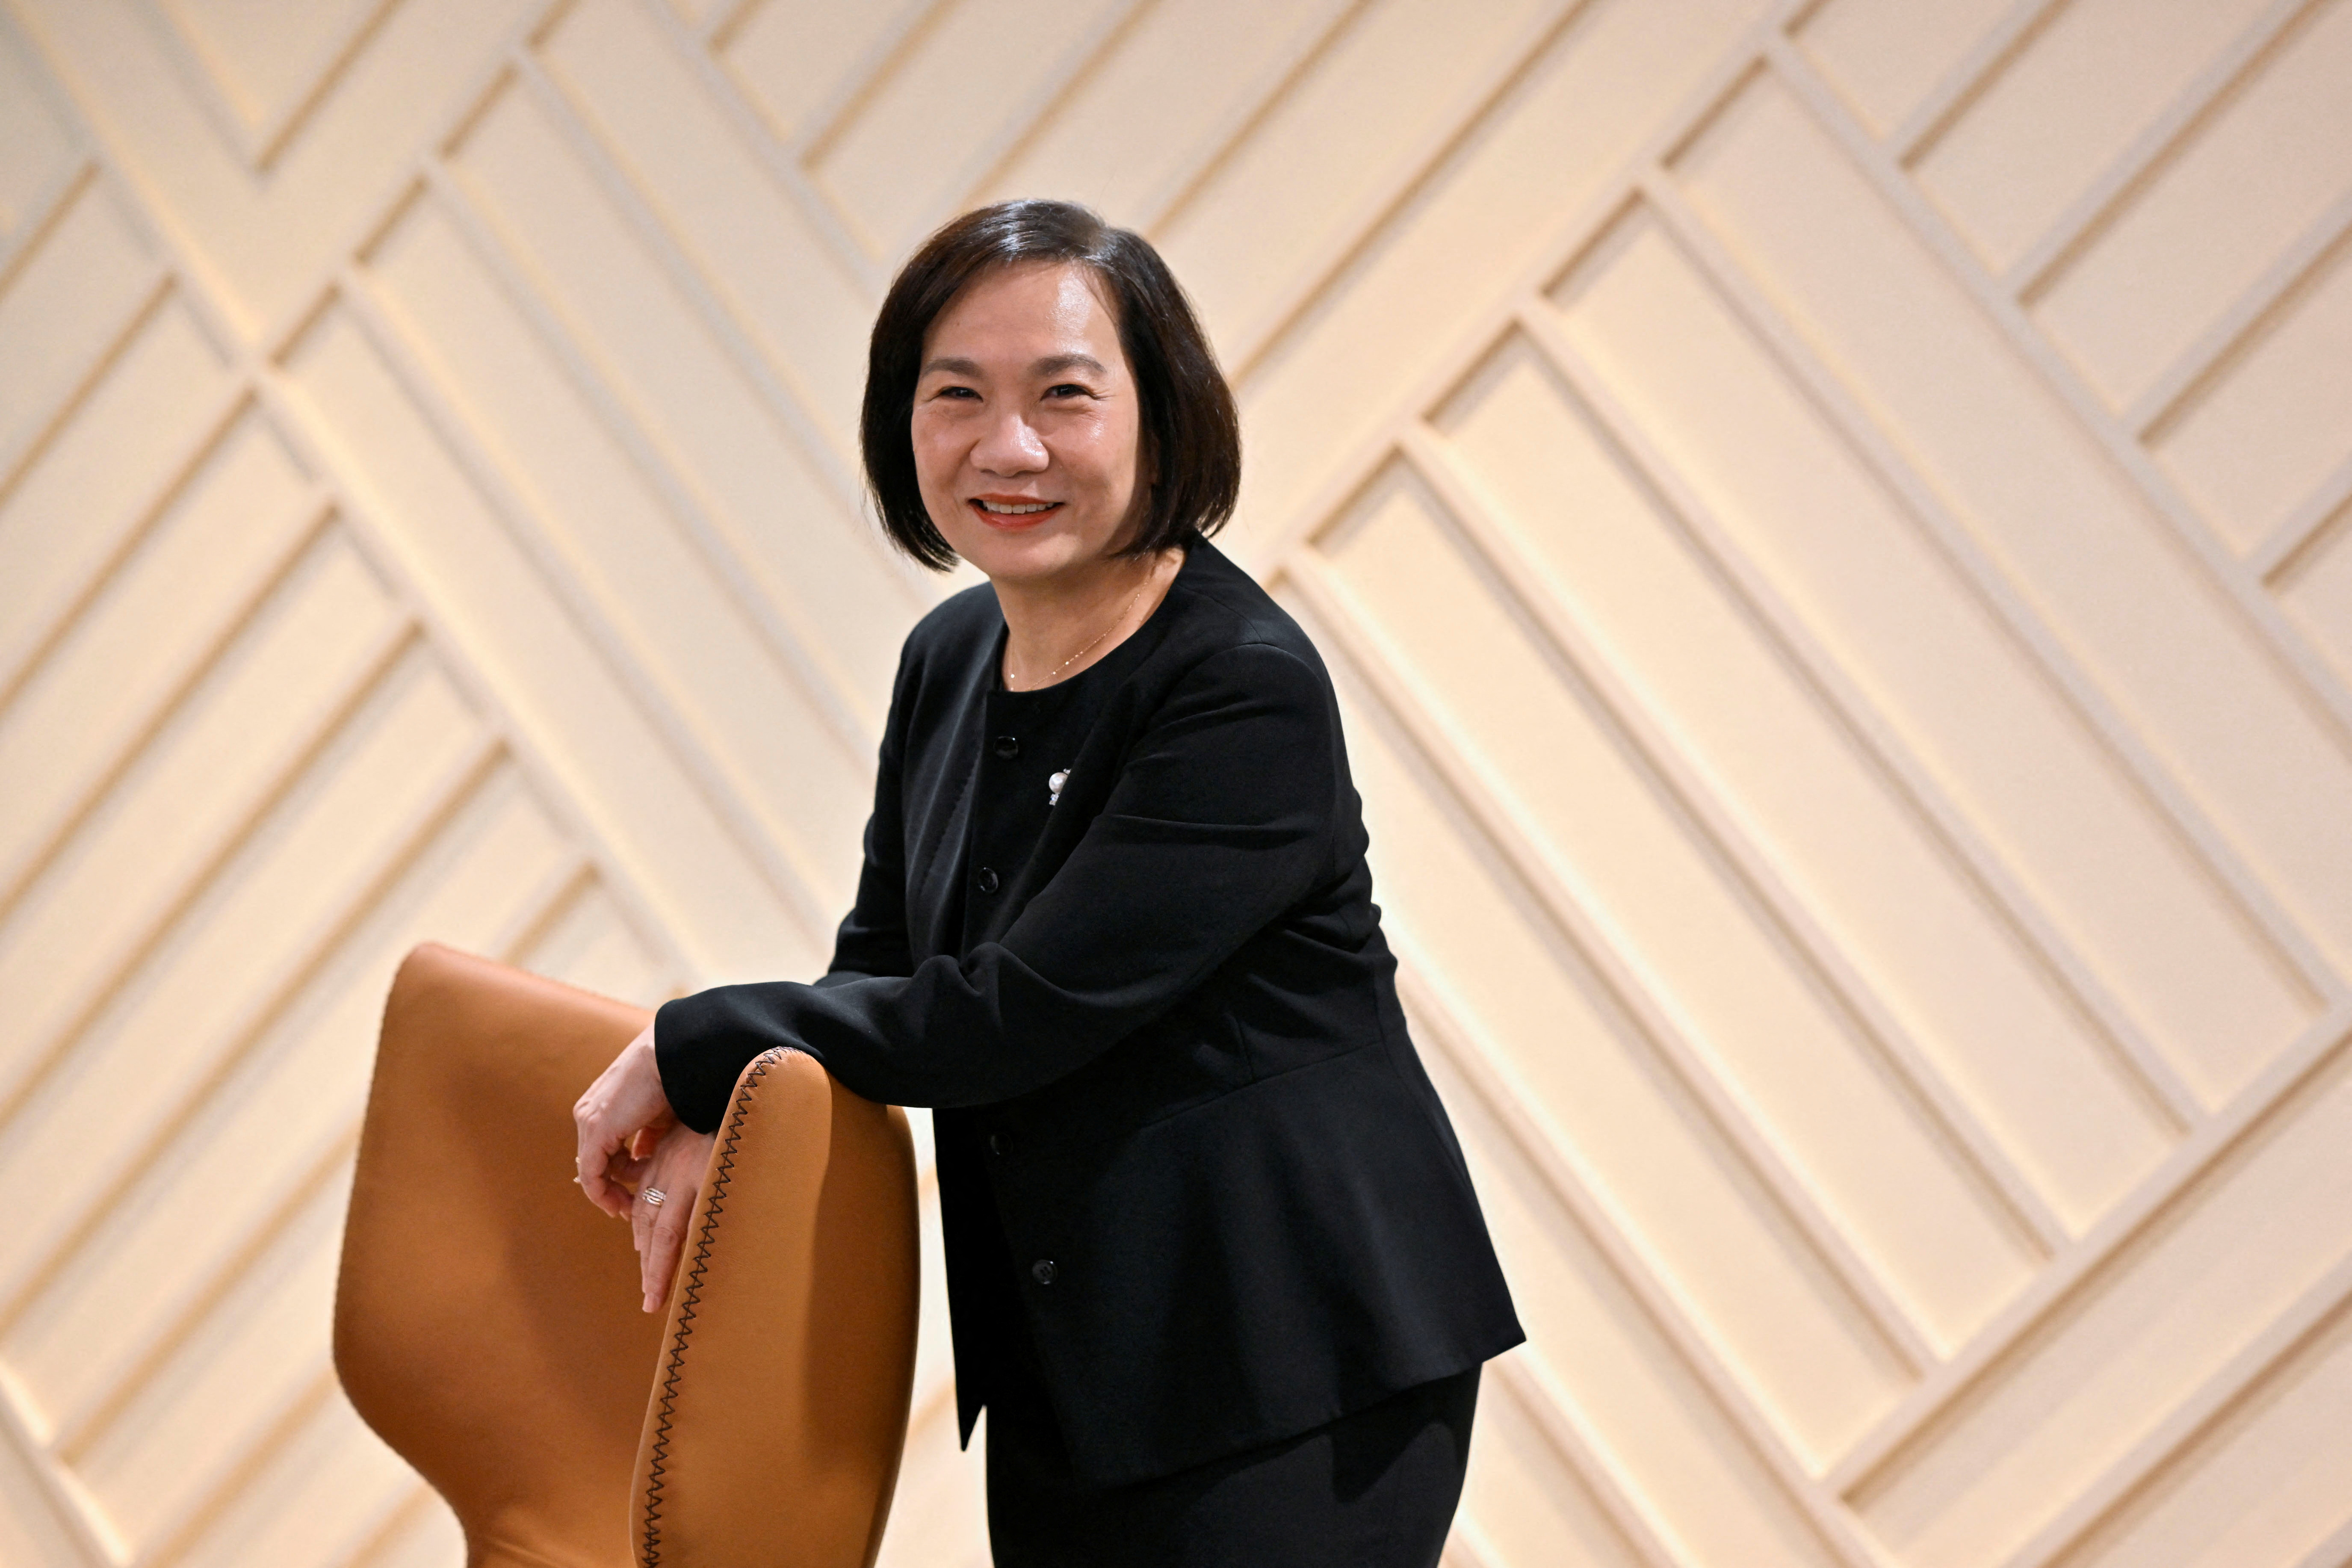 Helen Wong, Group CEO of OCBC Bank poses for a portrait during an interview with Reuters in Singapore